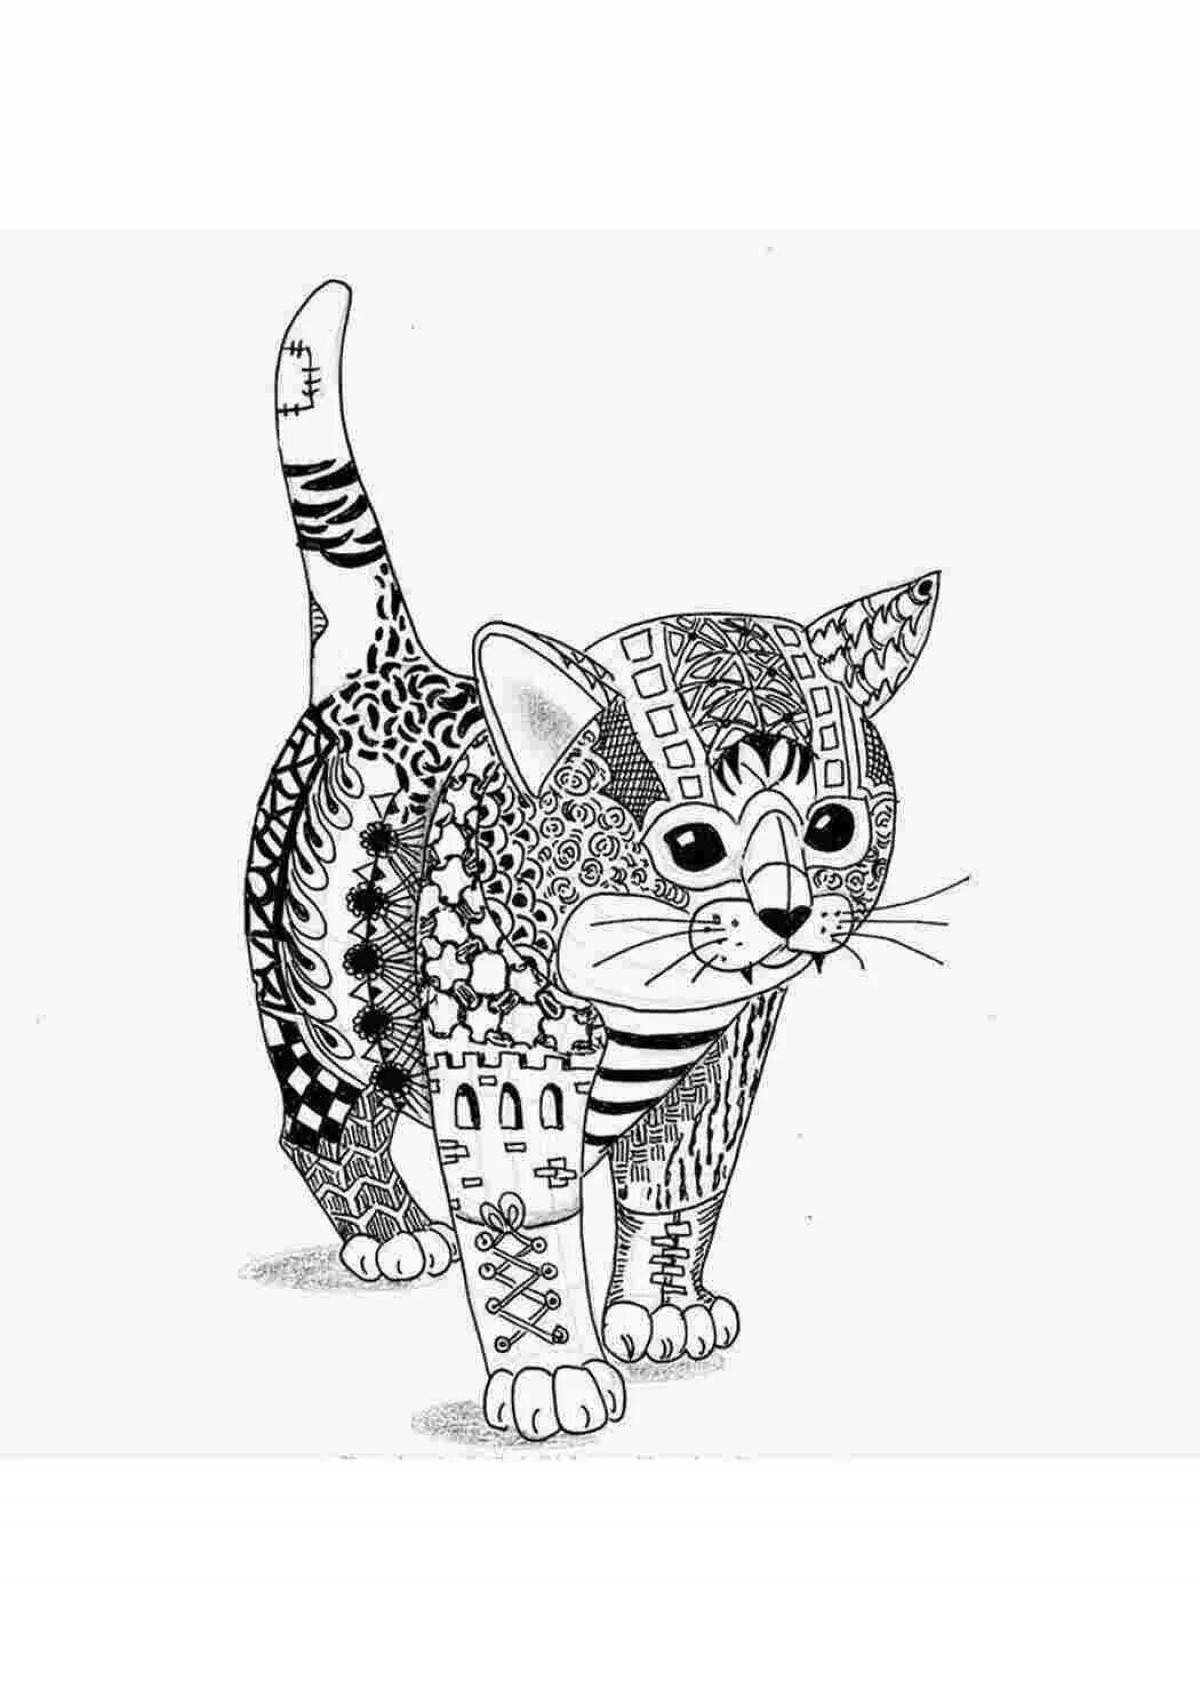 Delightful coloring book for cats